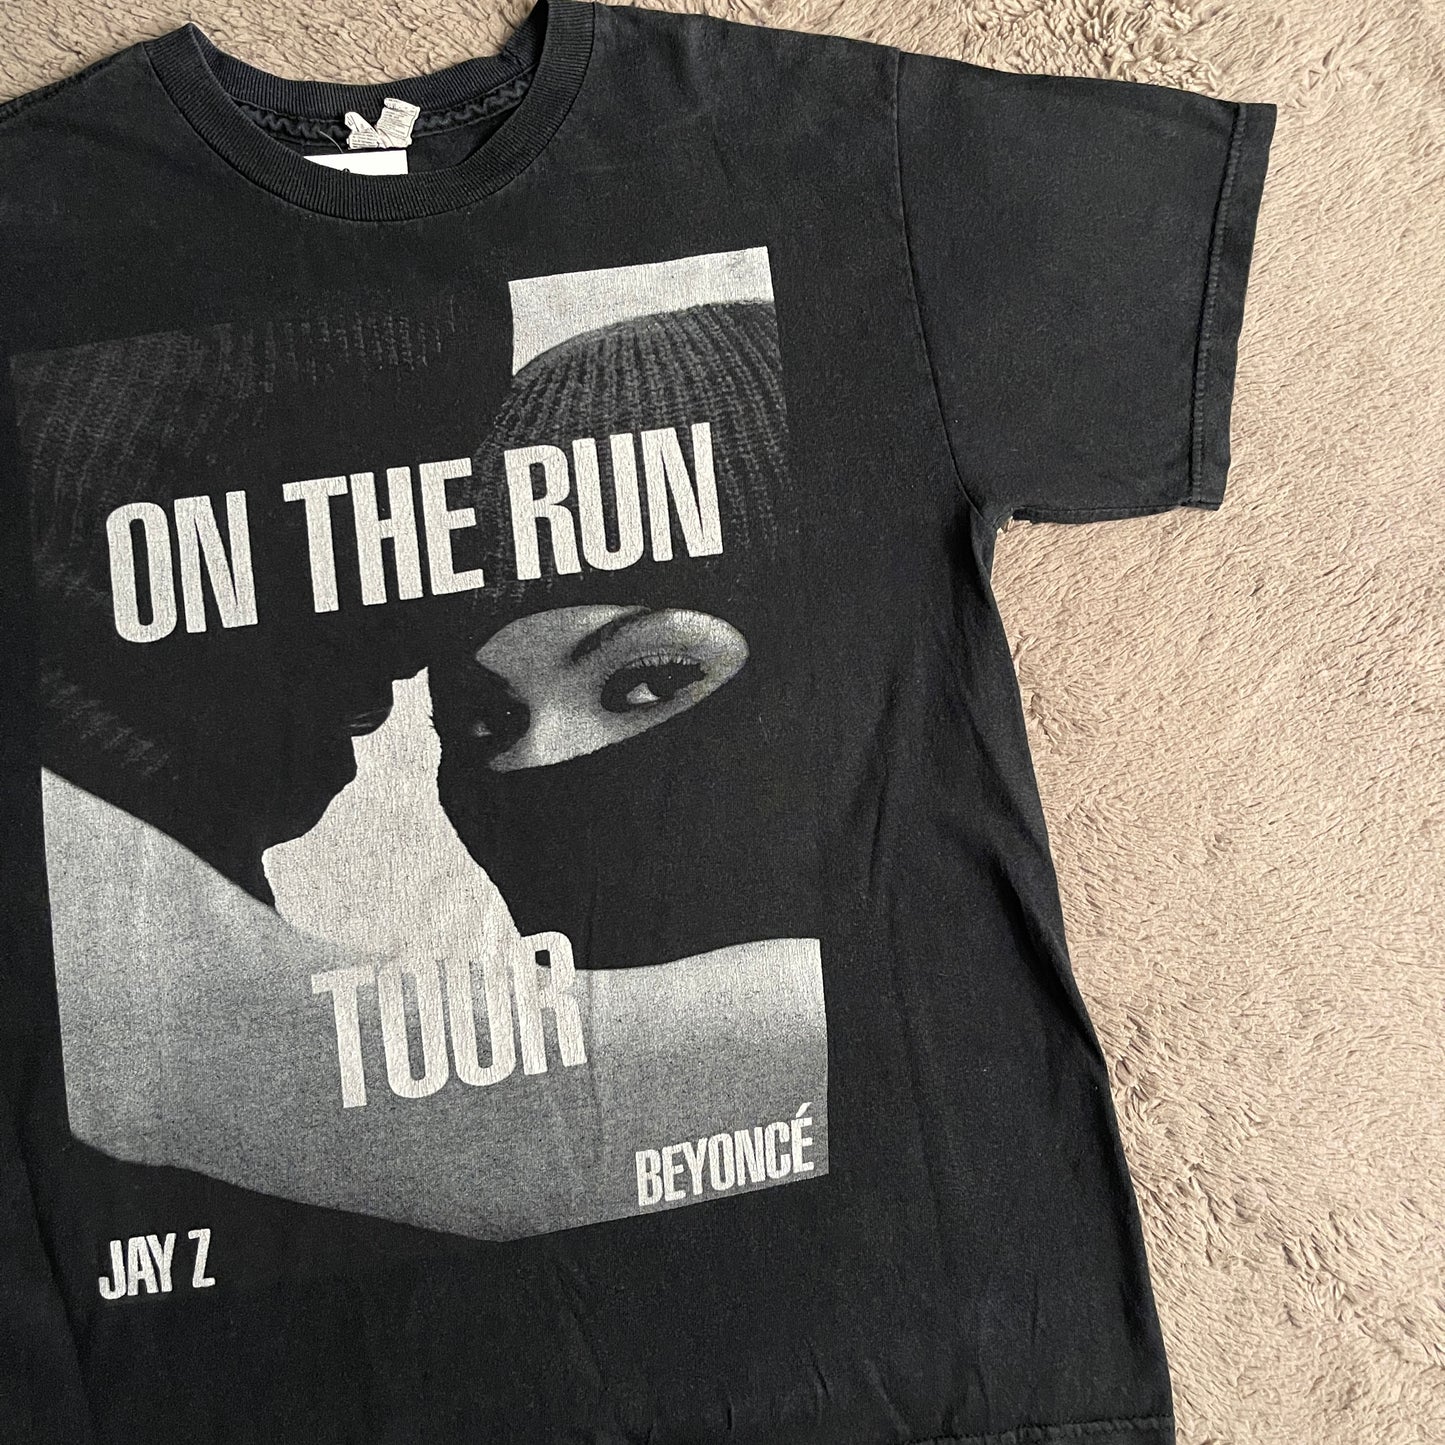 Beyonce x Jay-Z On The Run Tour Tee (M)